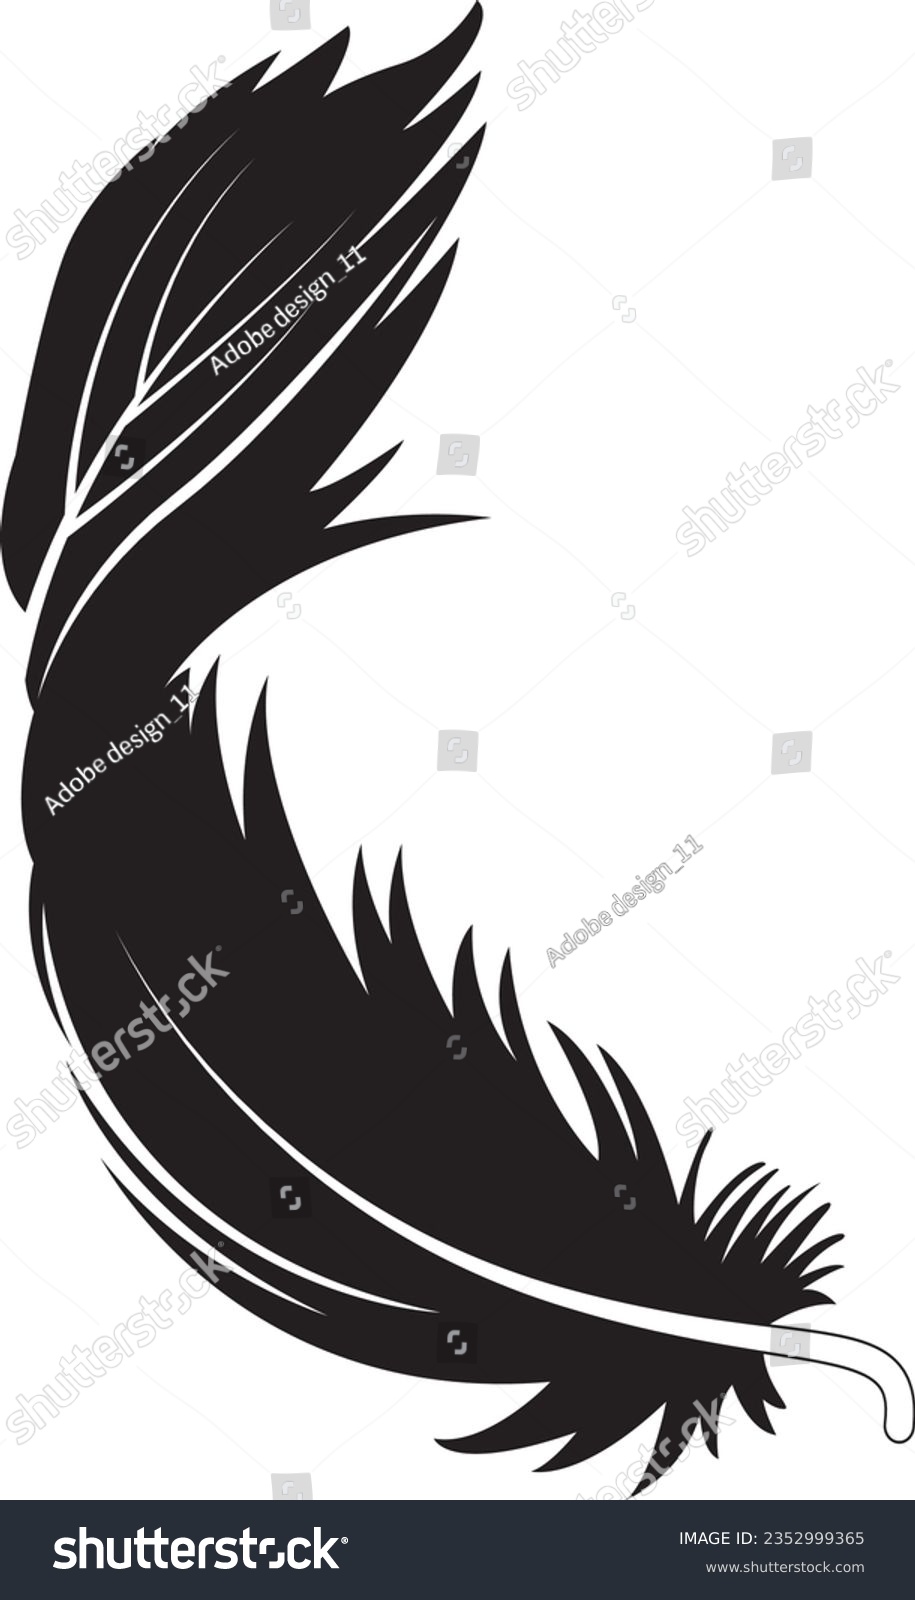 SVG of Feathers Svg, Collection black feather, Feathers Silhouette svg